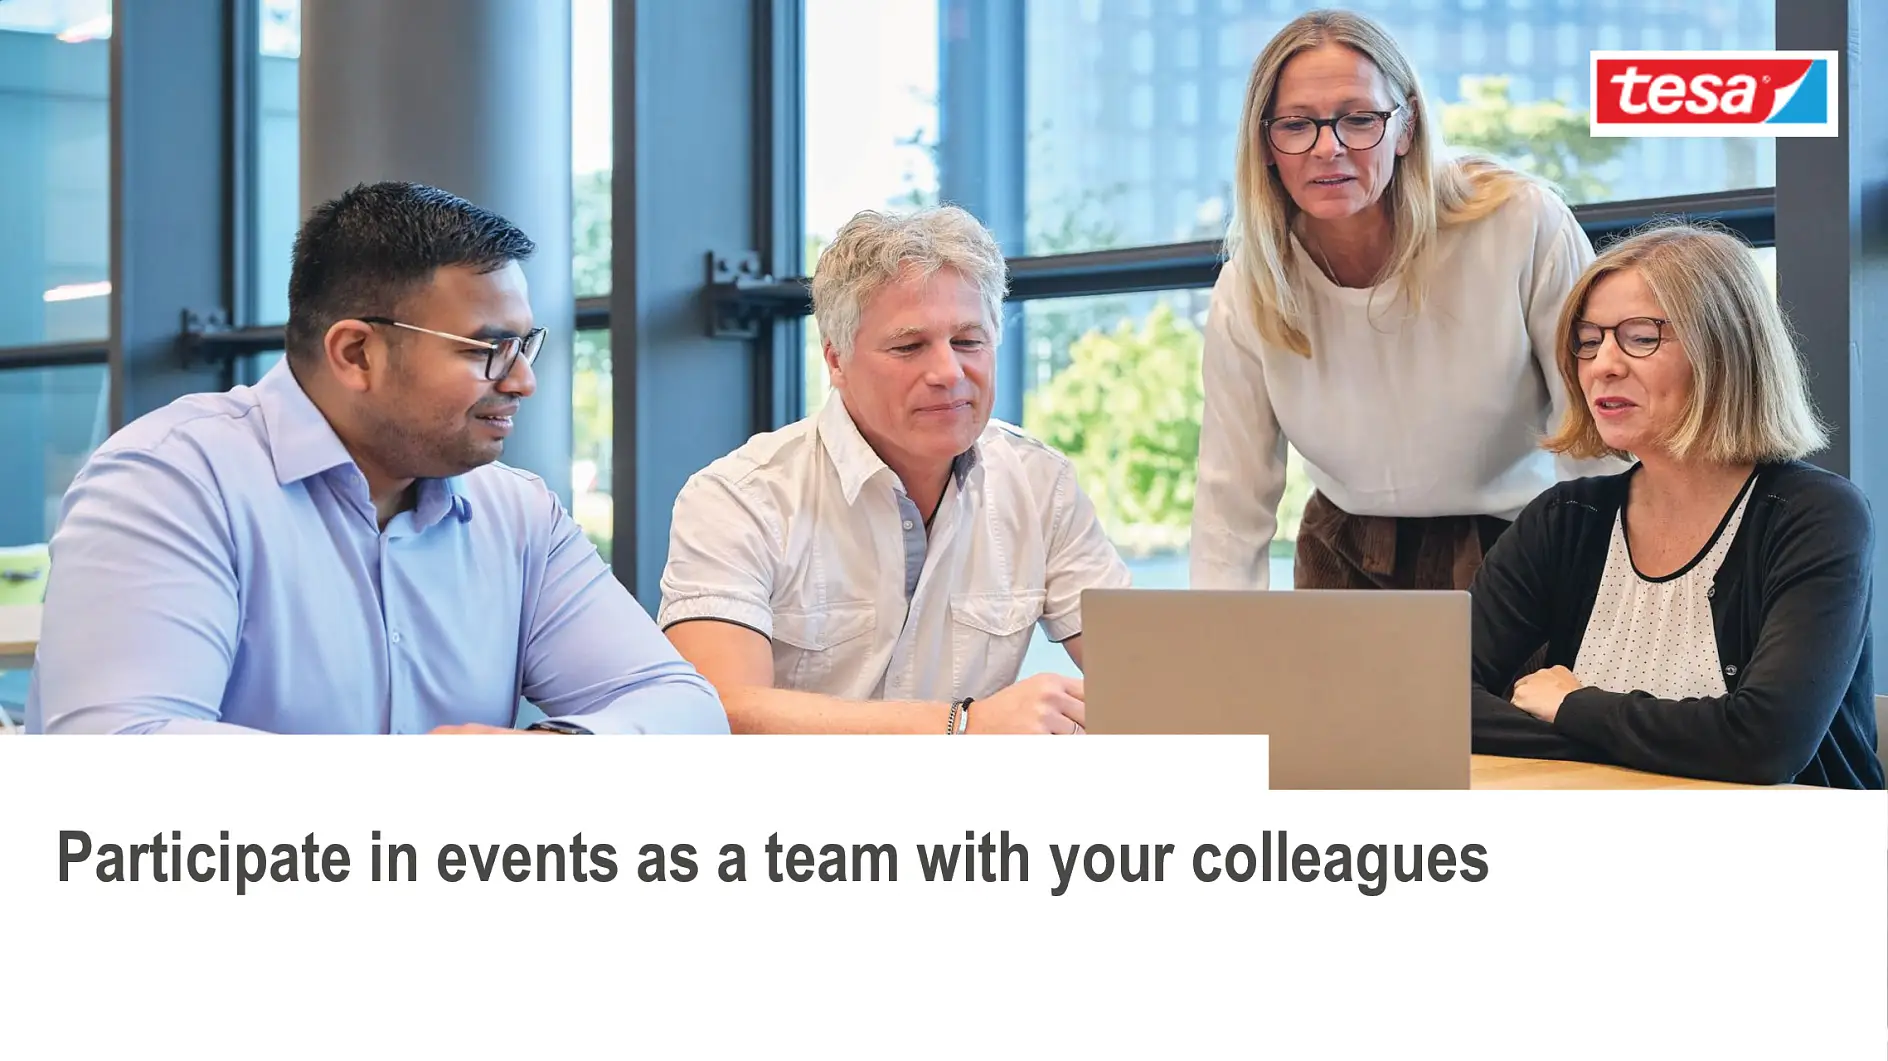 3. Participate in events as a team with your colleagues